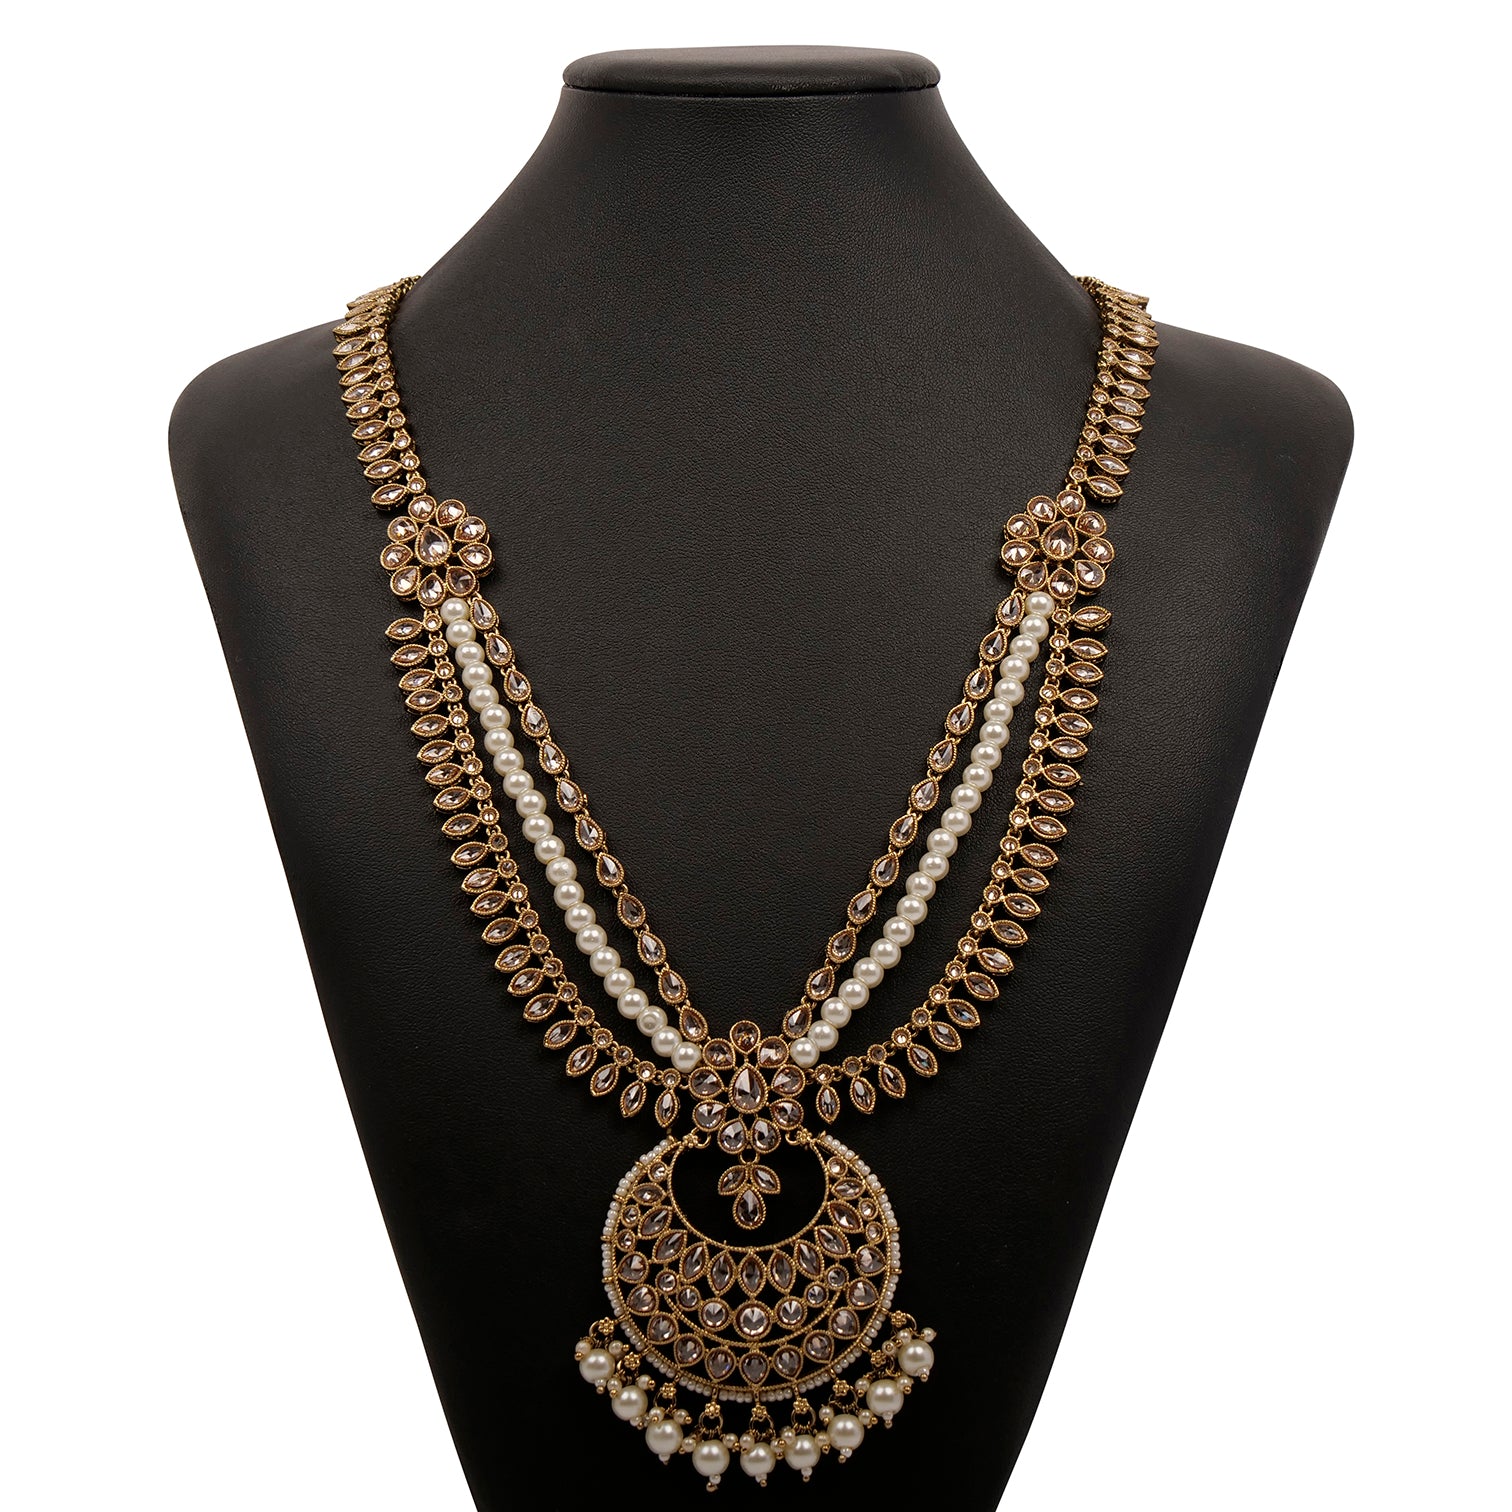 Nara Chaand Long Necklace in Pearl and Antique Gold